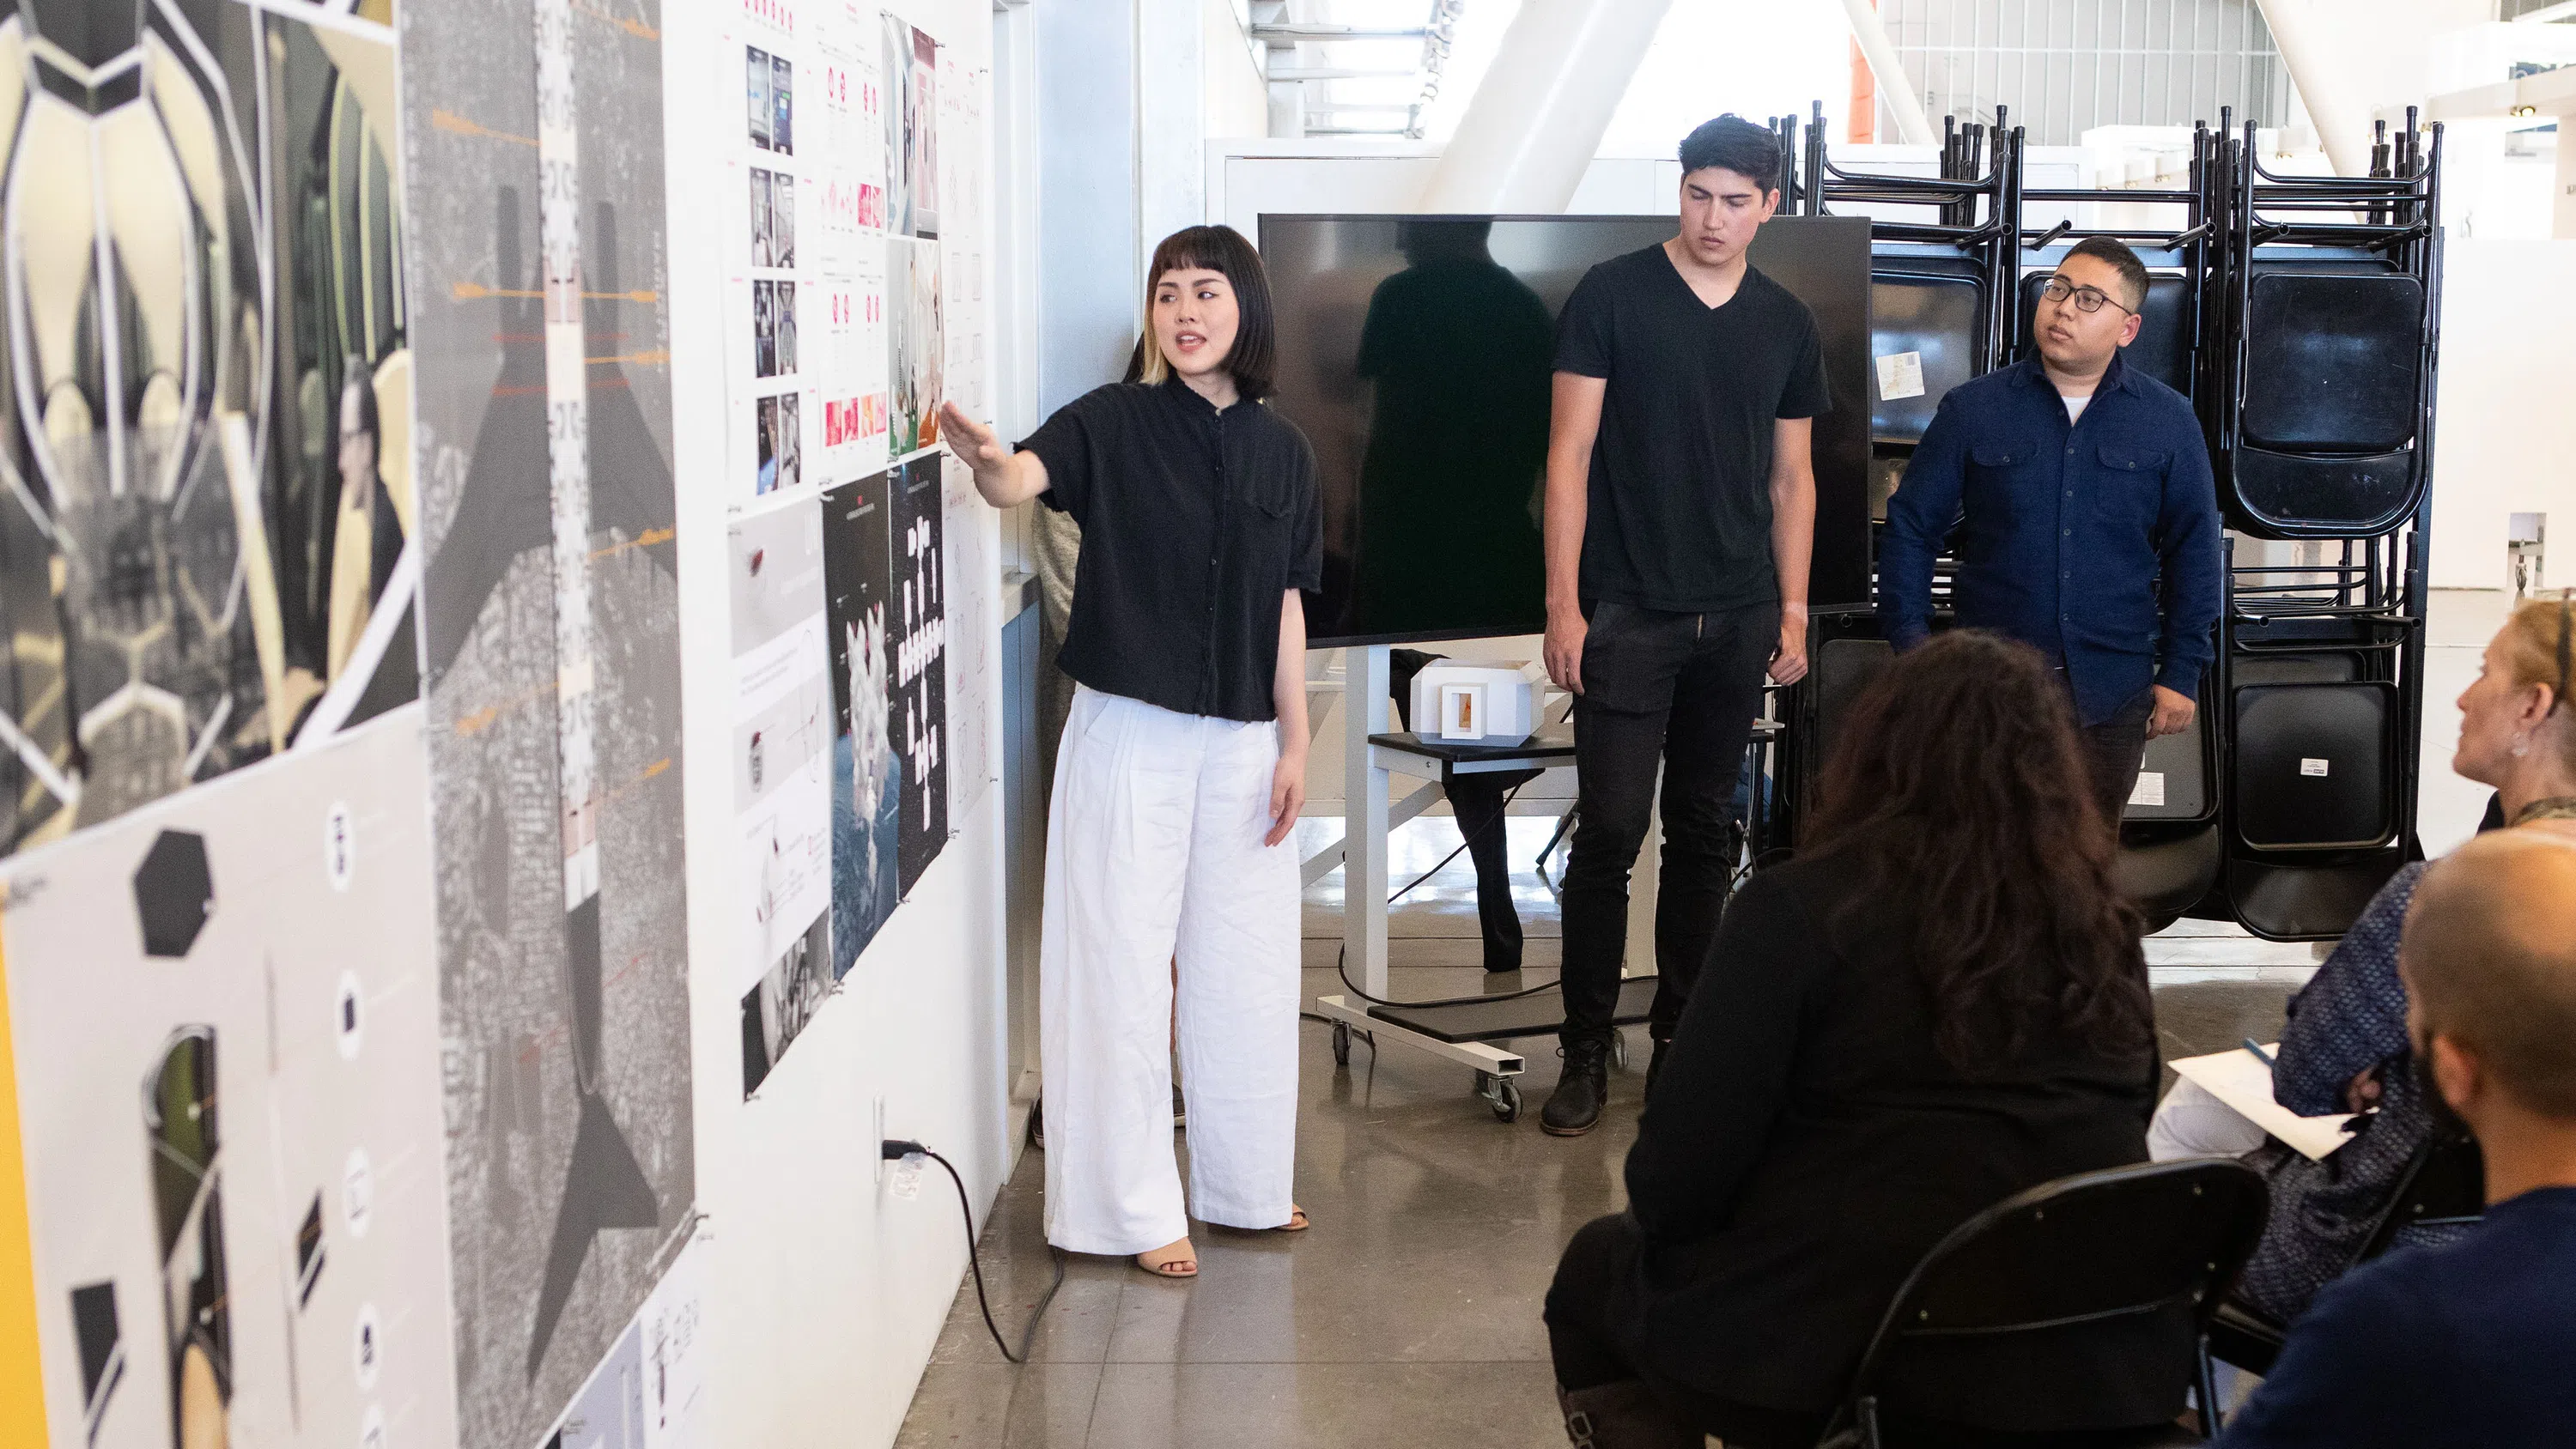 A student gestures at a pin-up installation of her work during an Interior Design critique.